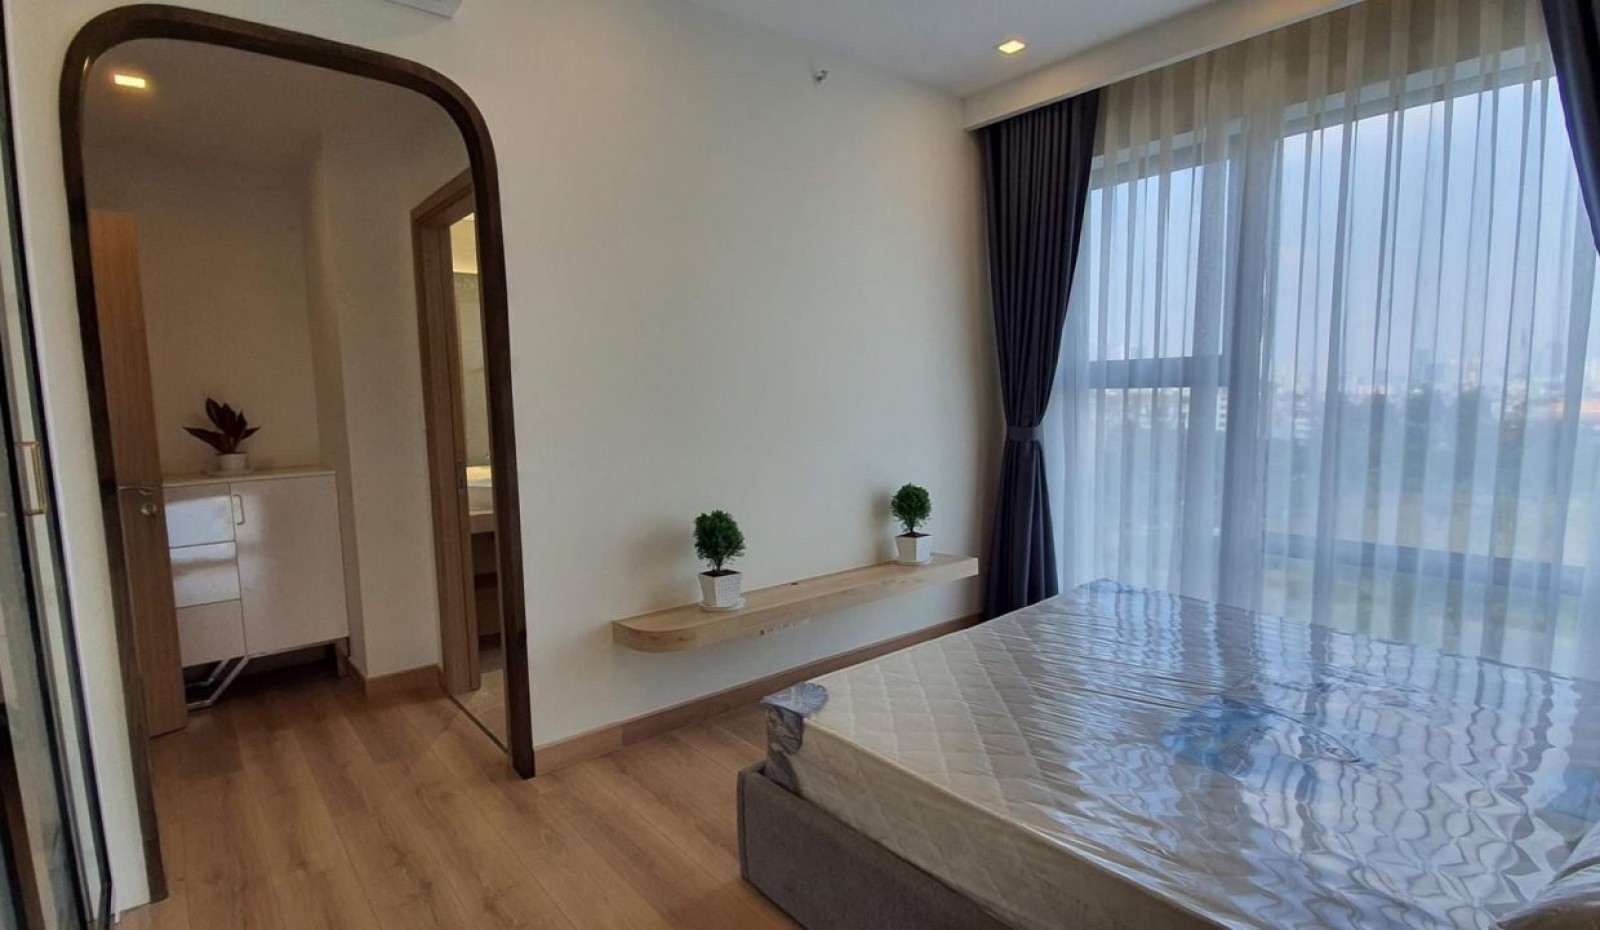 Brilliant Apartment For Rent In Urban Hill Phu My Hung, District 7 fully interiors - 326